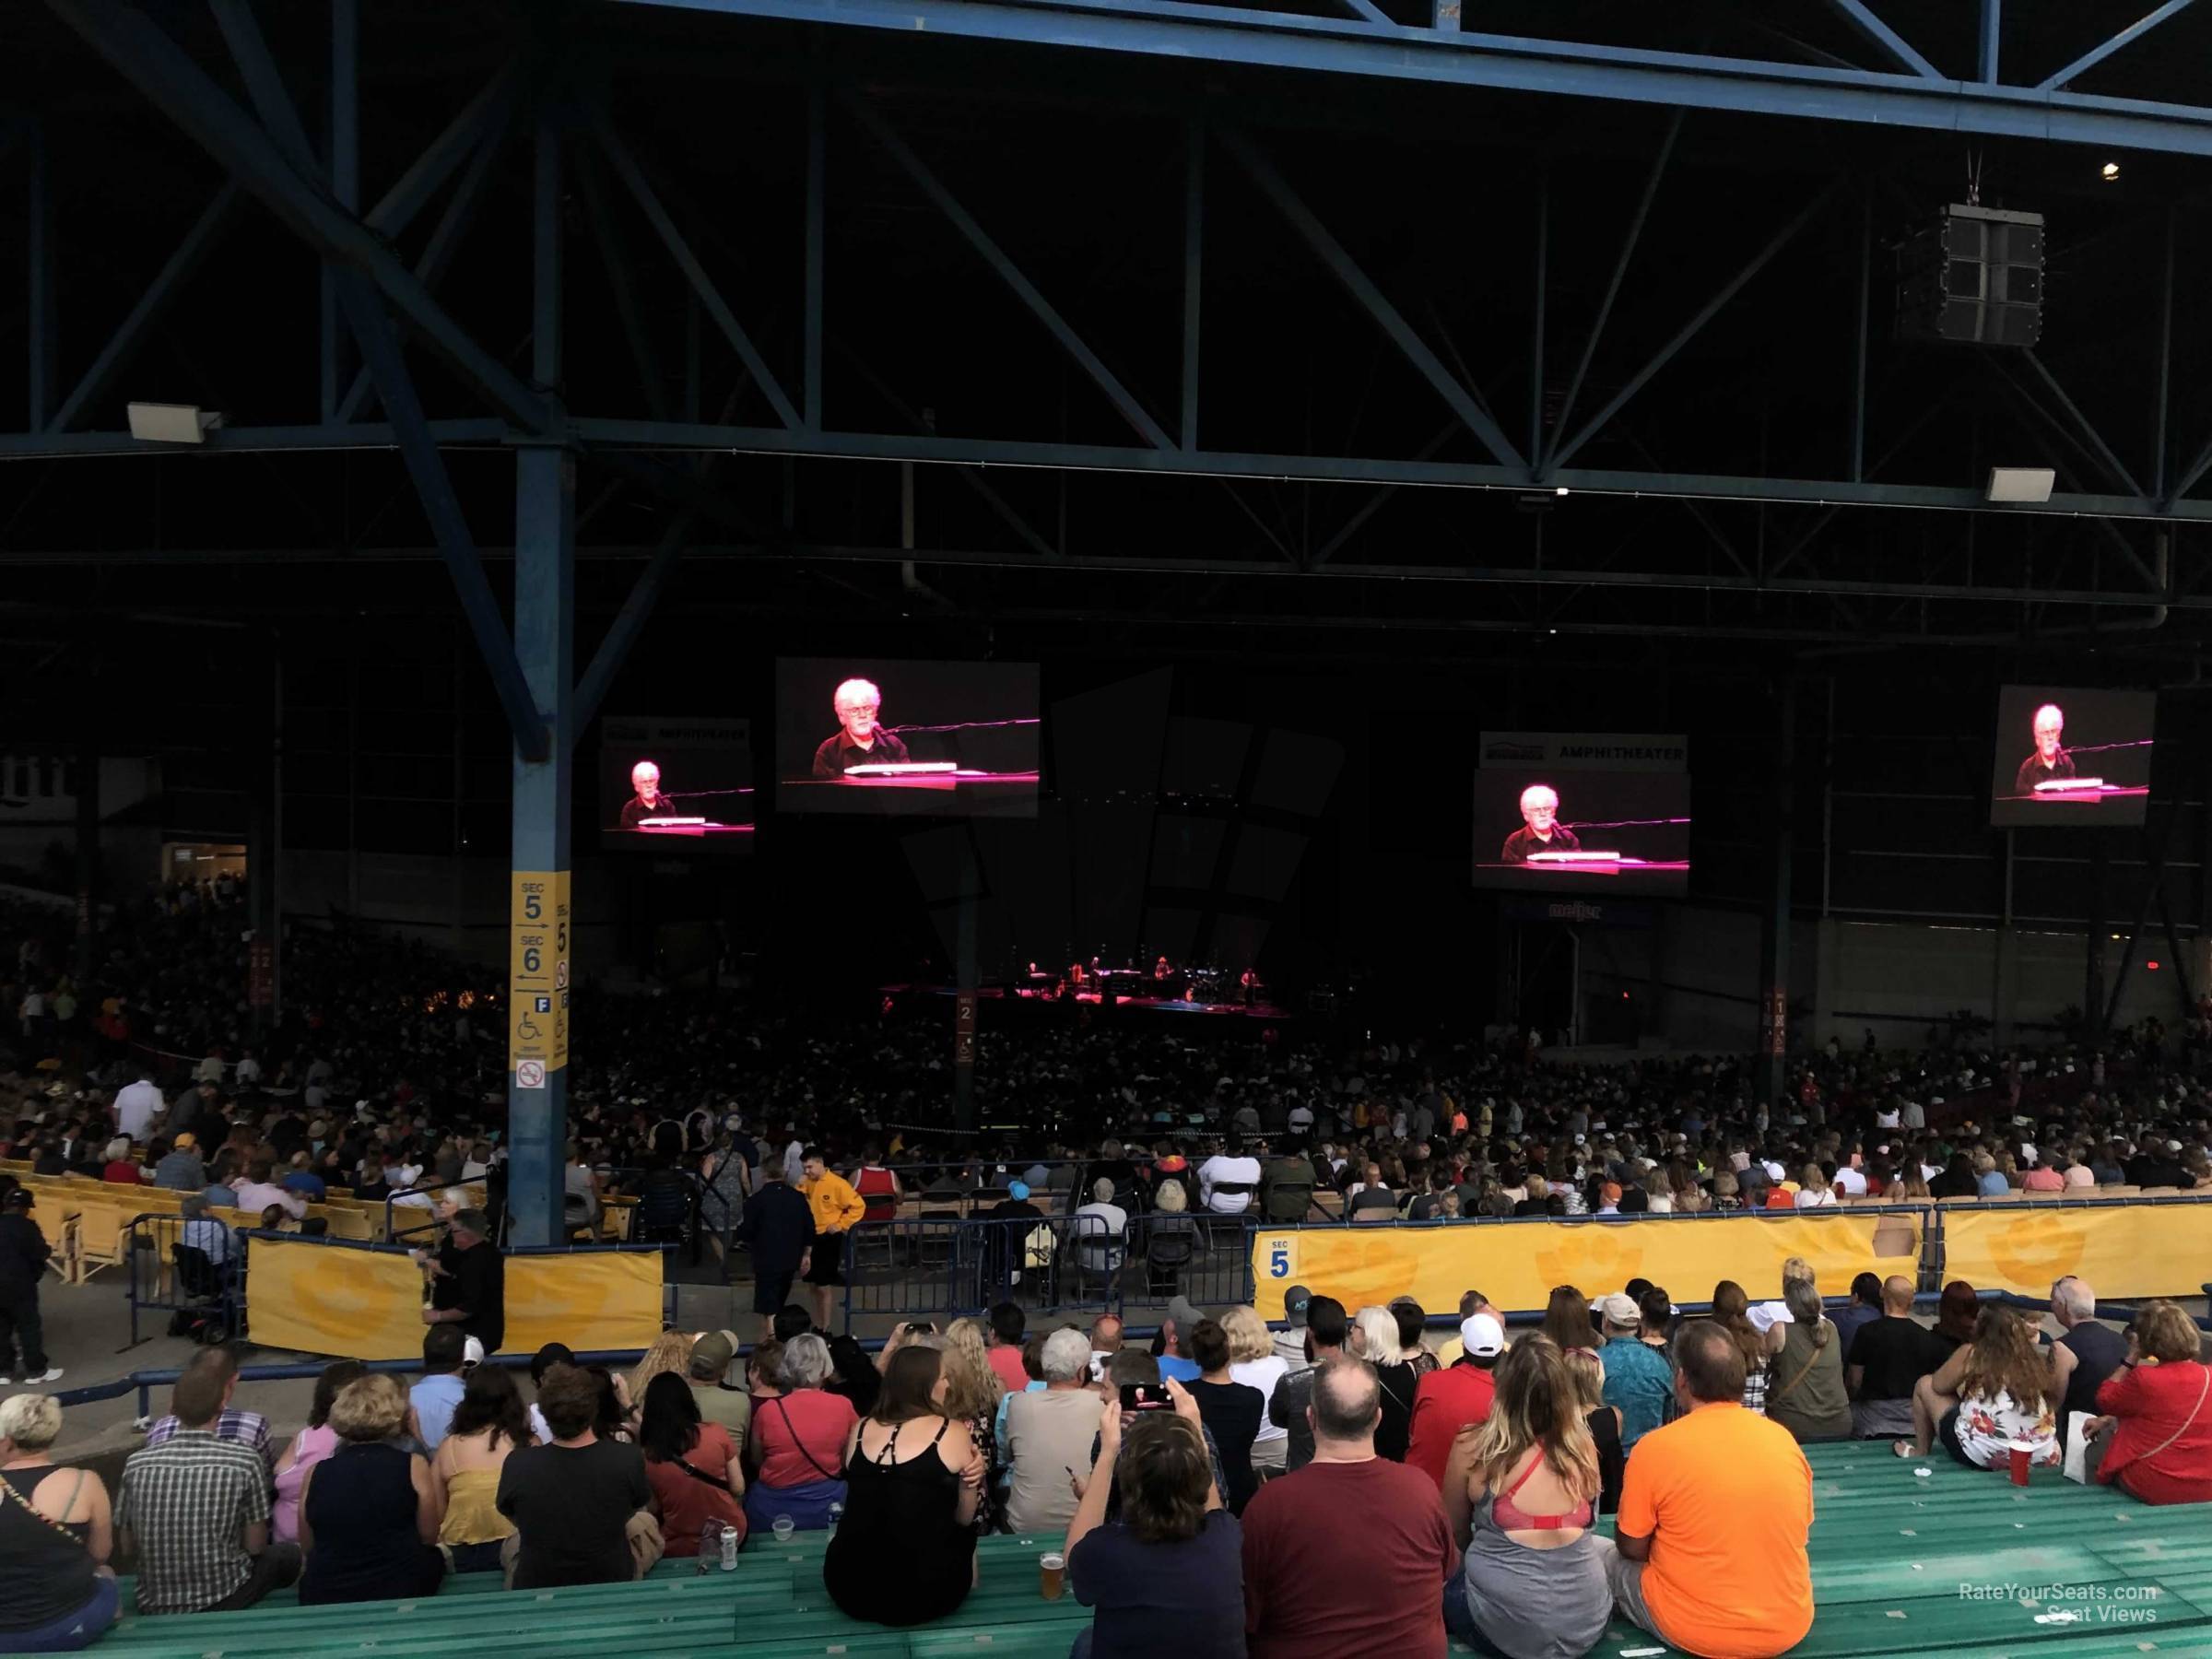 section 306, row j seat view  - american family insurance amphitheater